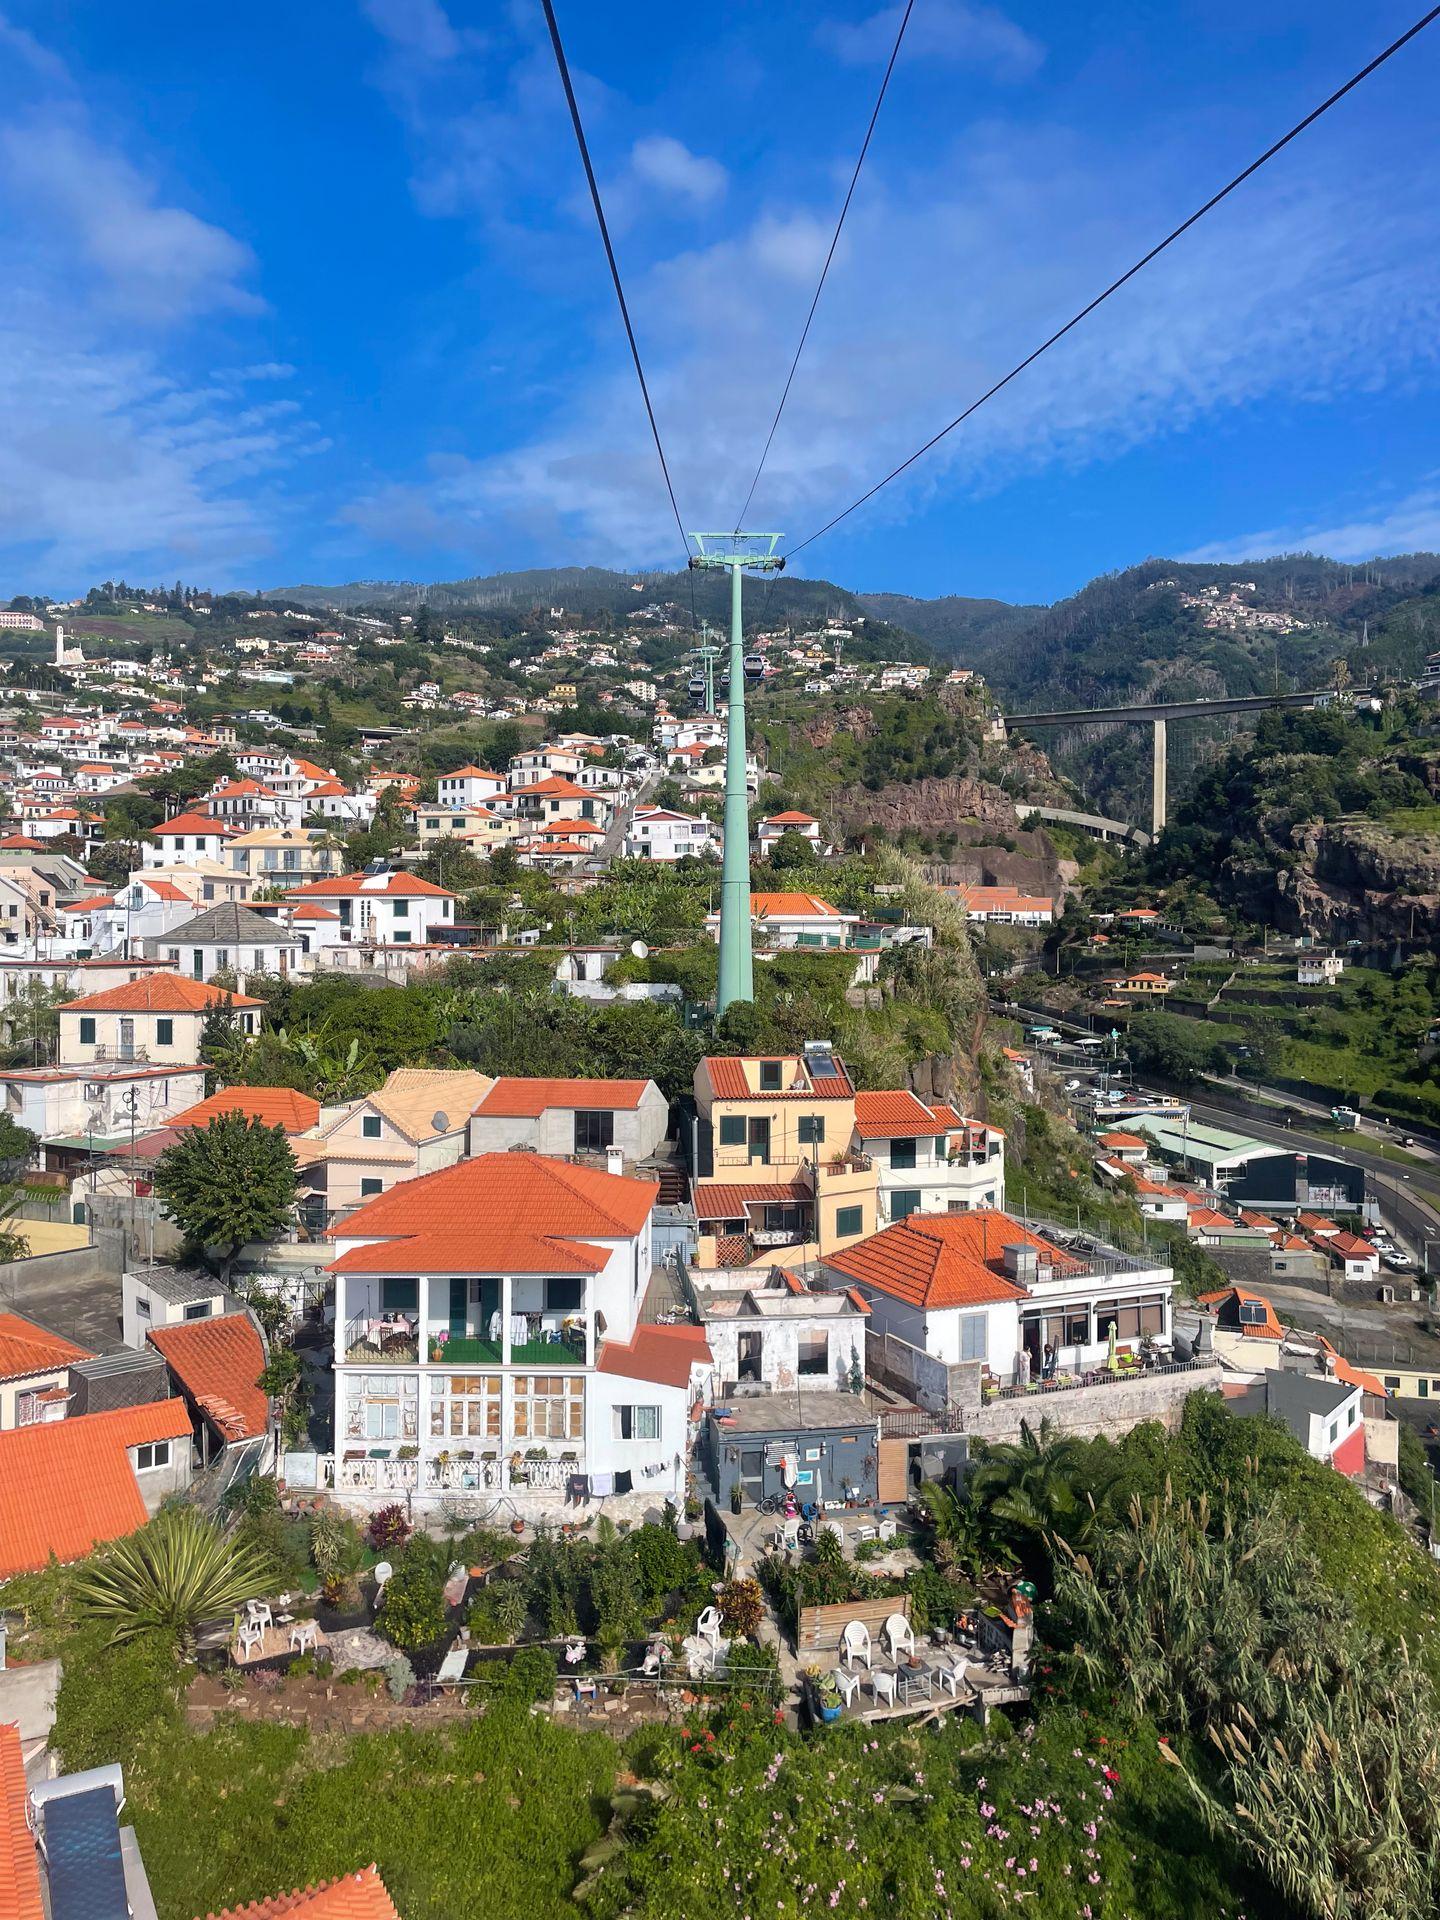 A view of houses and buildings from the Funchal Cable Car